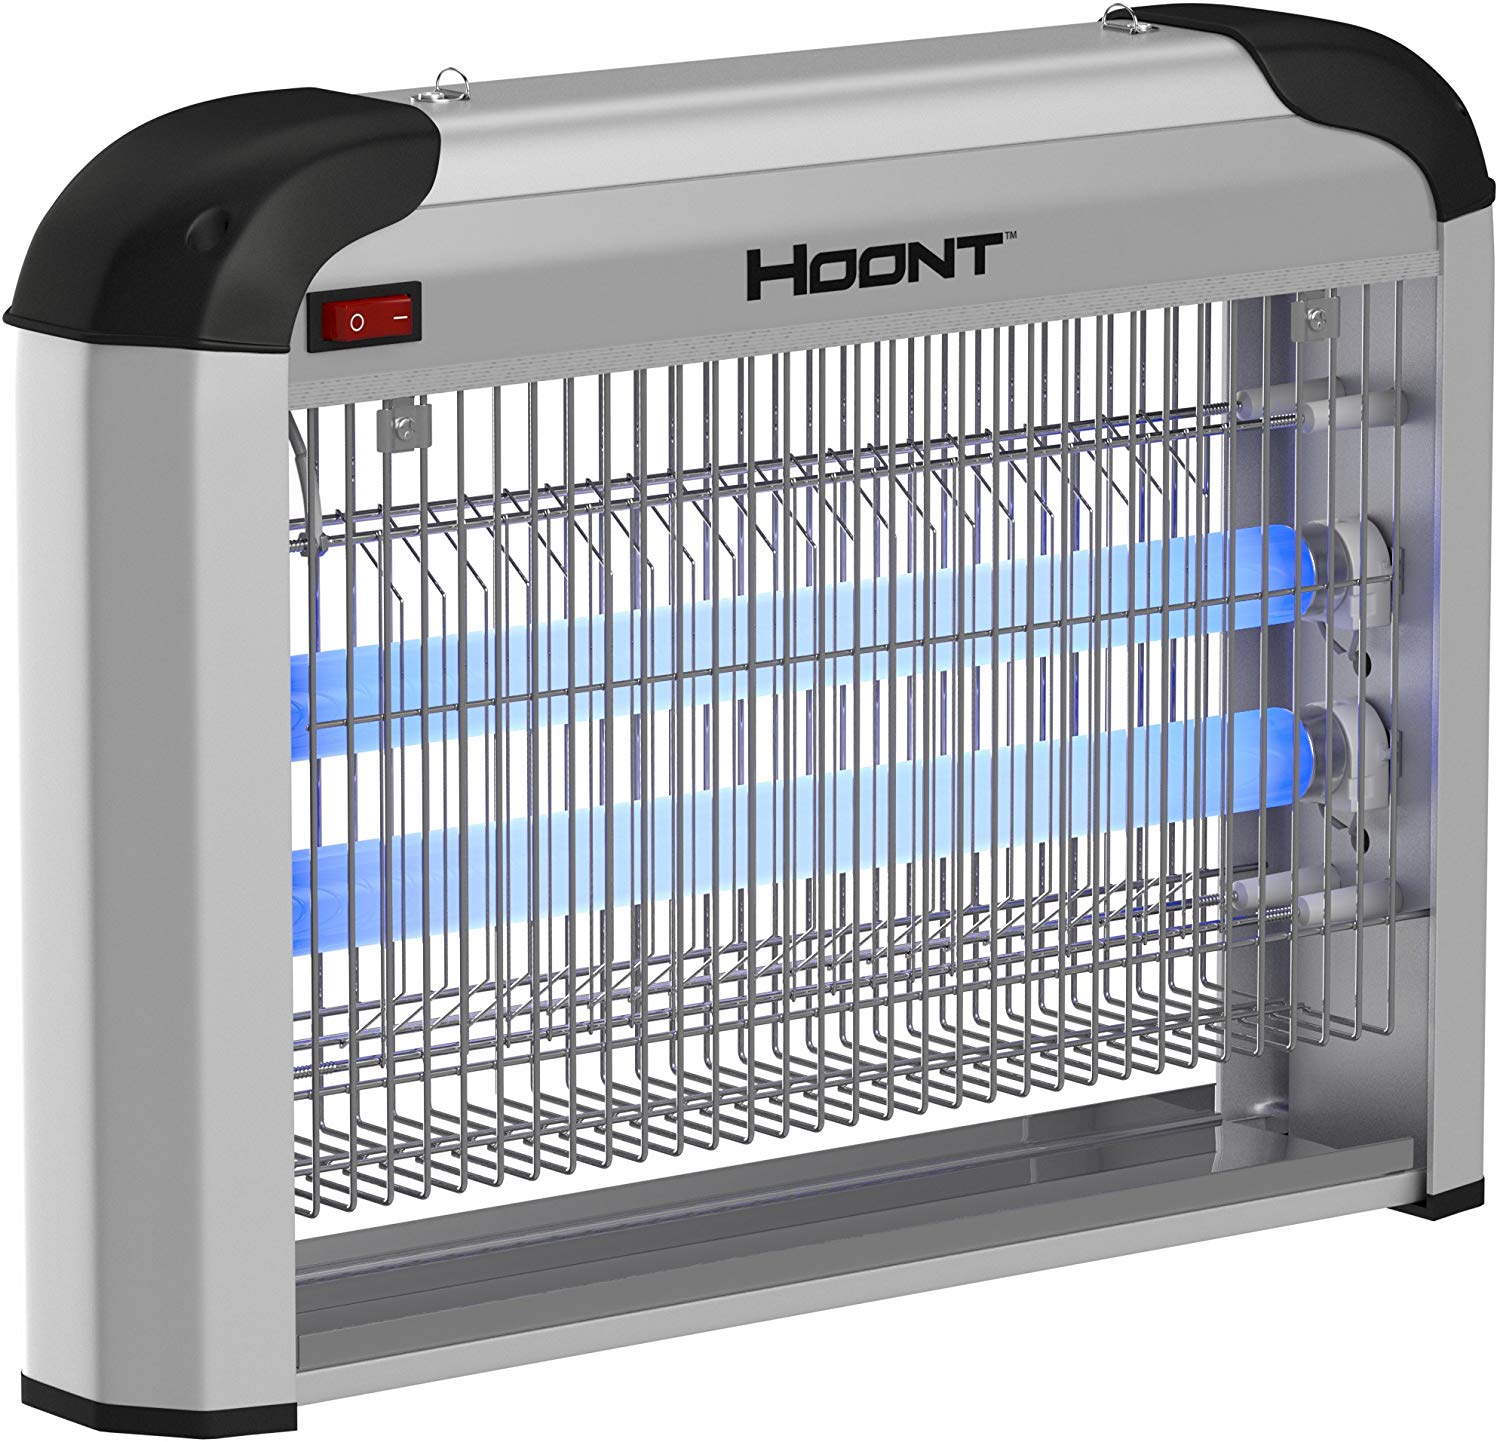 Hoont Insect Zapper